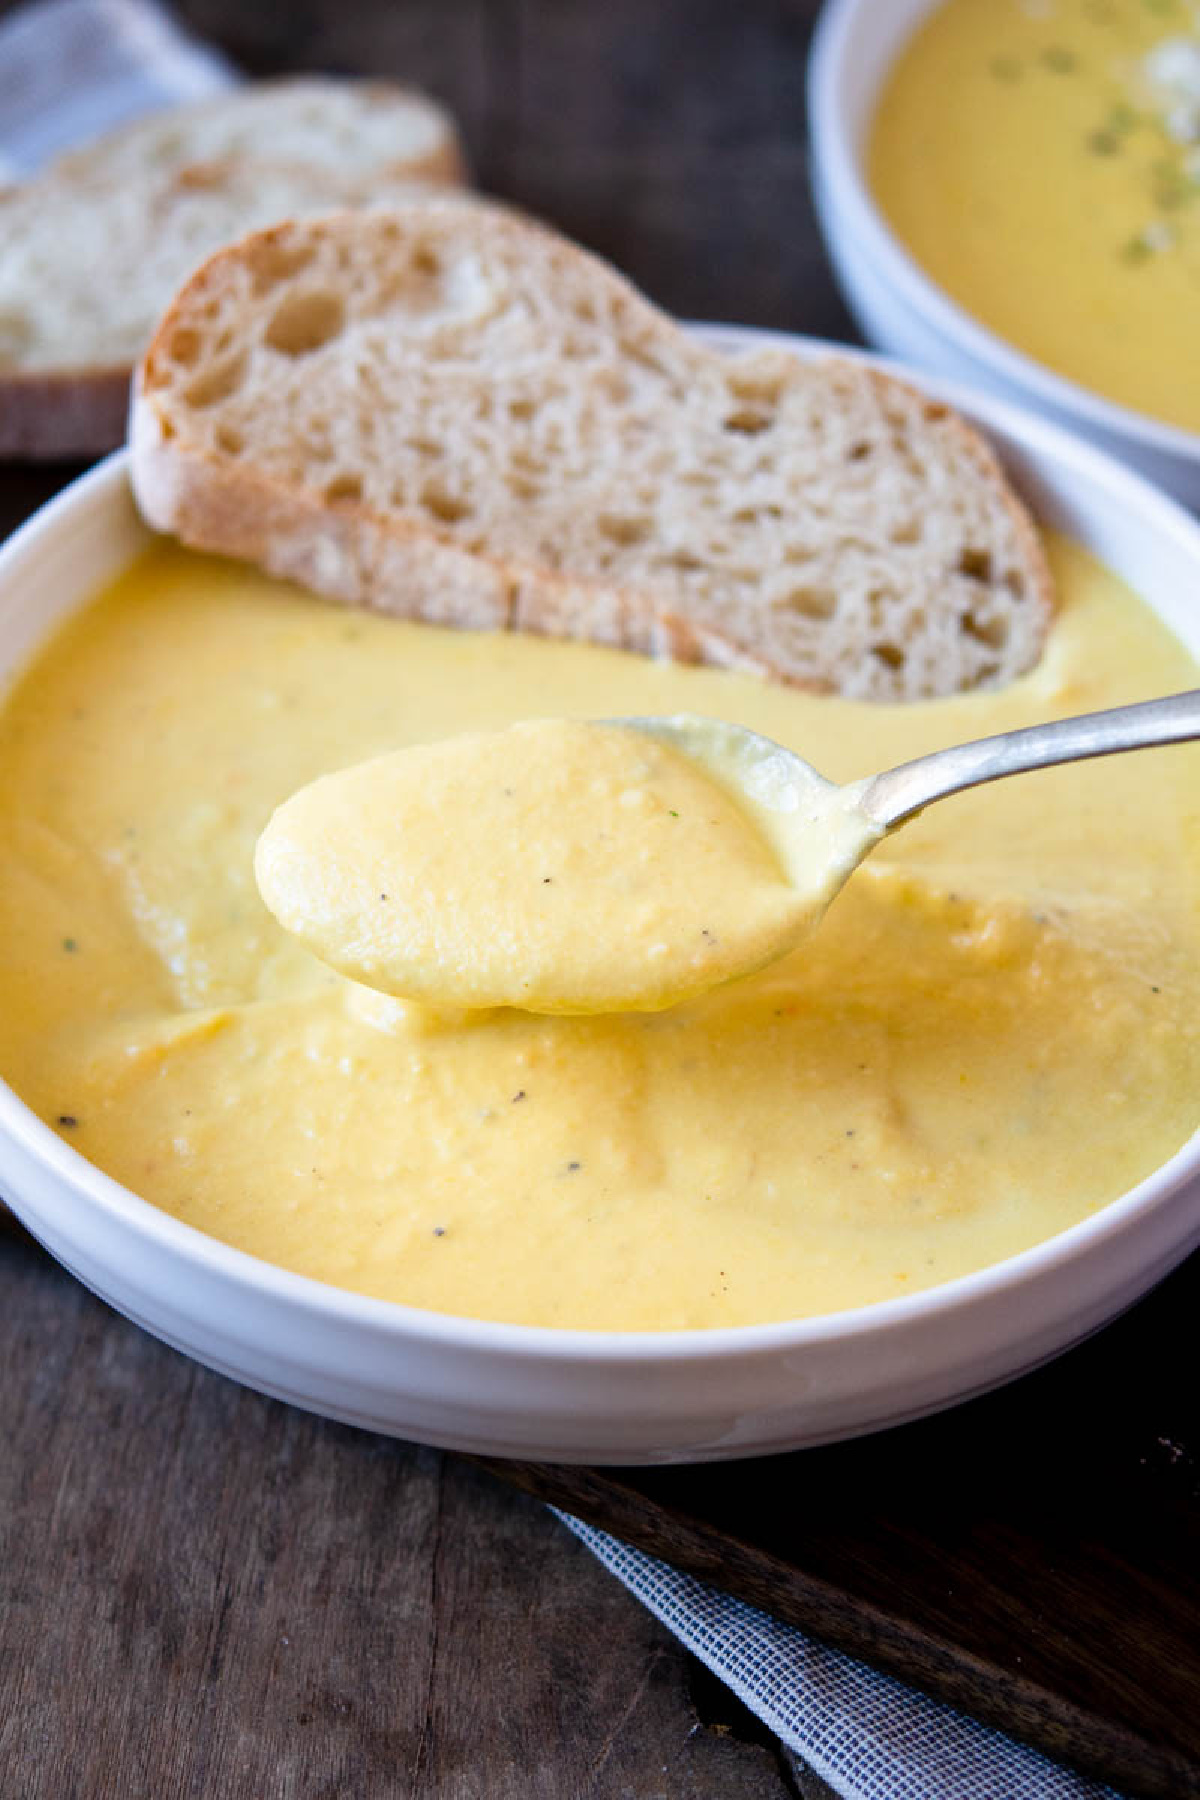 Cauliflower and Cheddar cheese soup